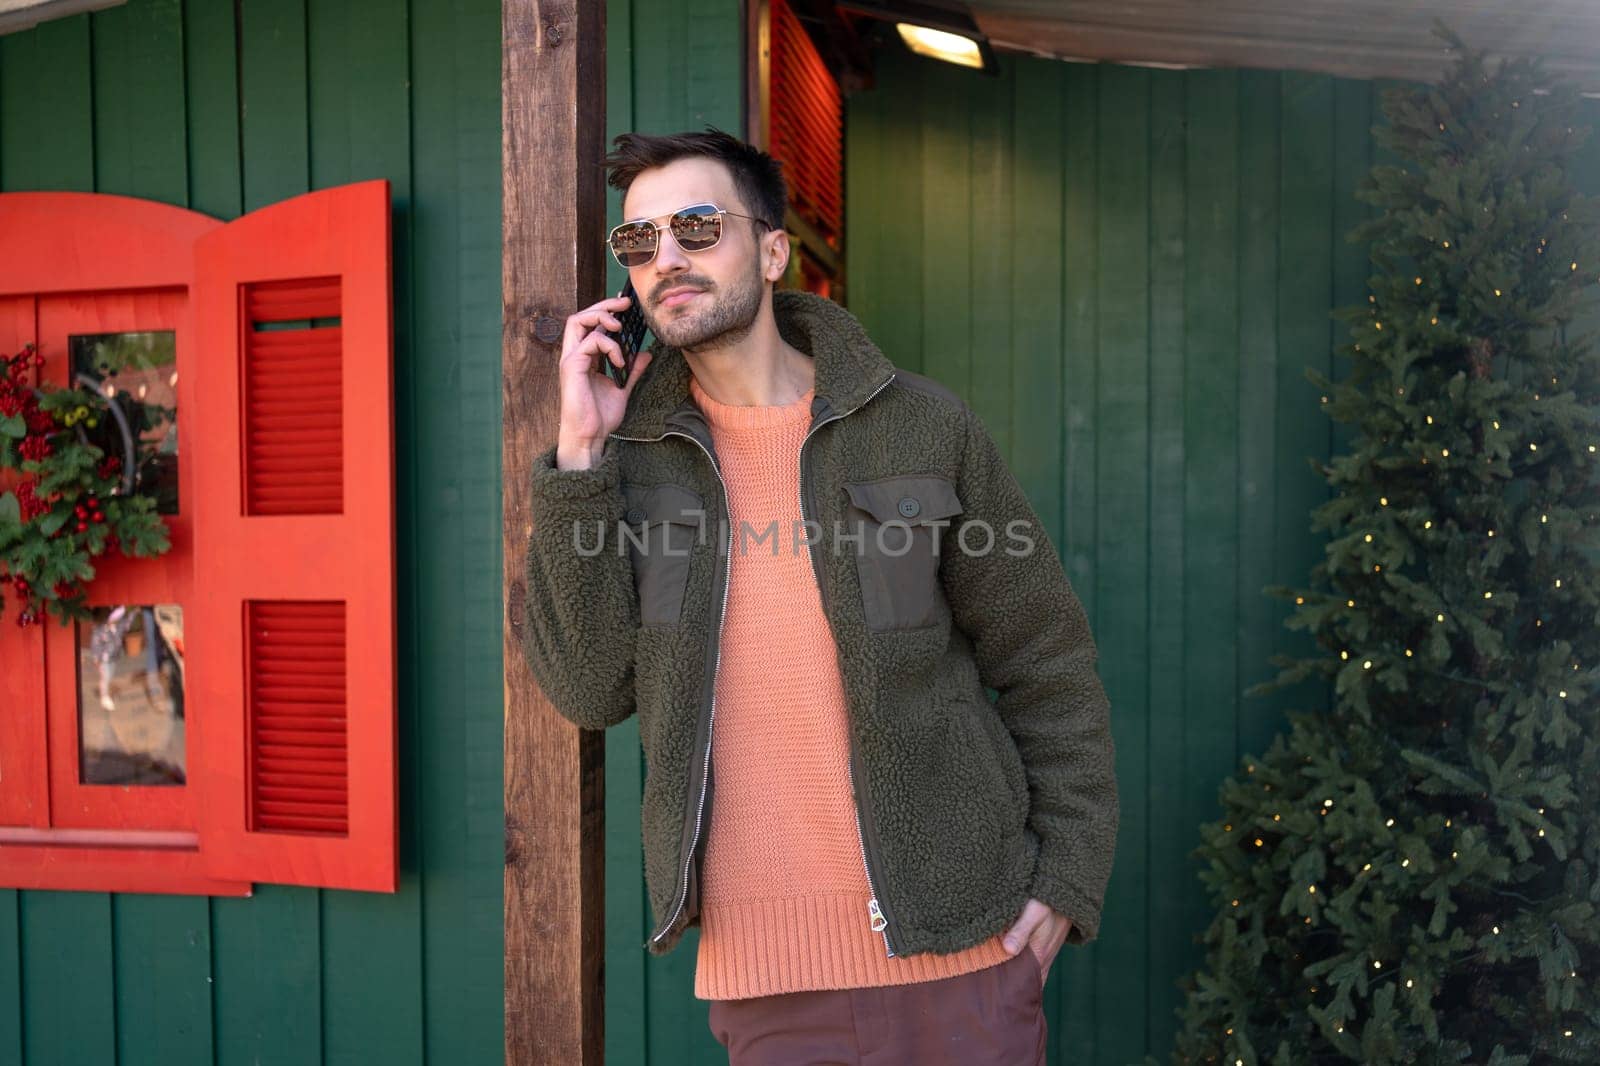 Caucasian man in sunglasses stands in festive town near Christmas tree, talking on smartphone. Stylish young guy in jacket extends holiday greetings through mobile device.